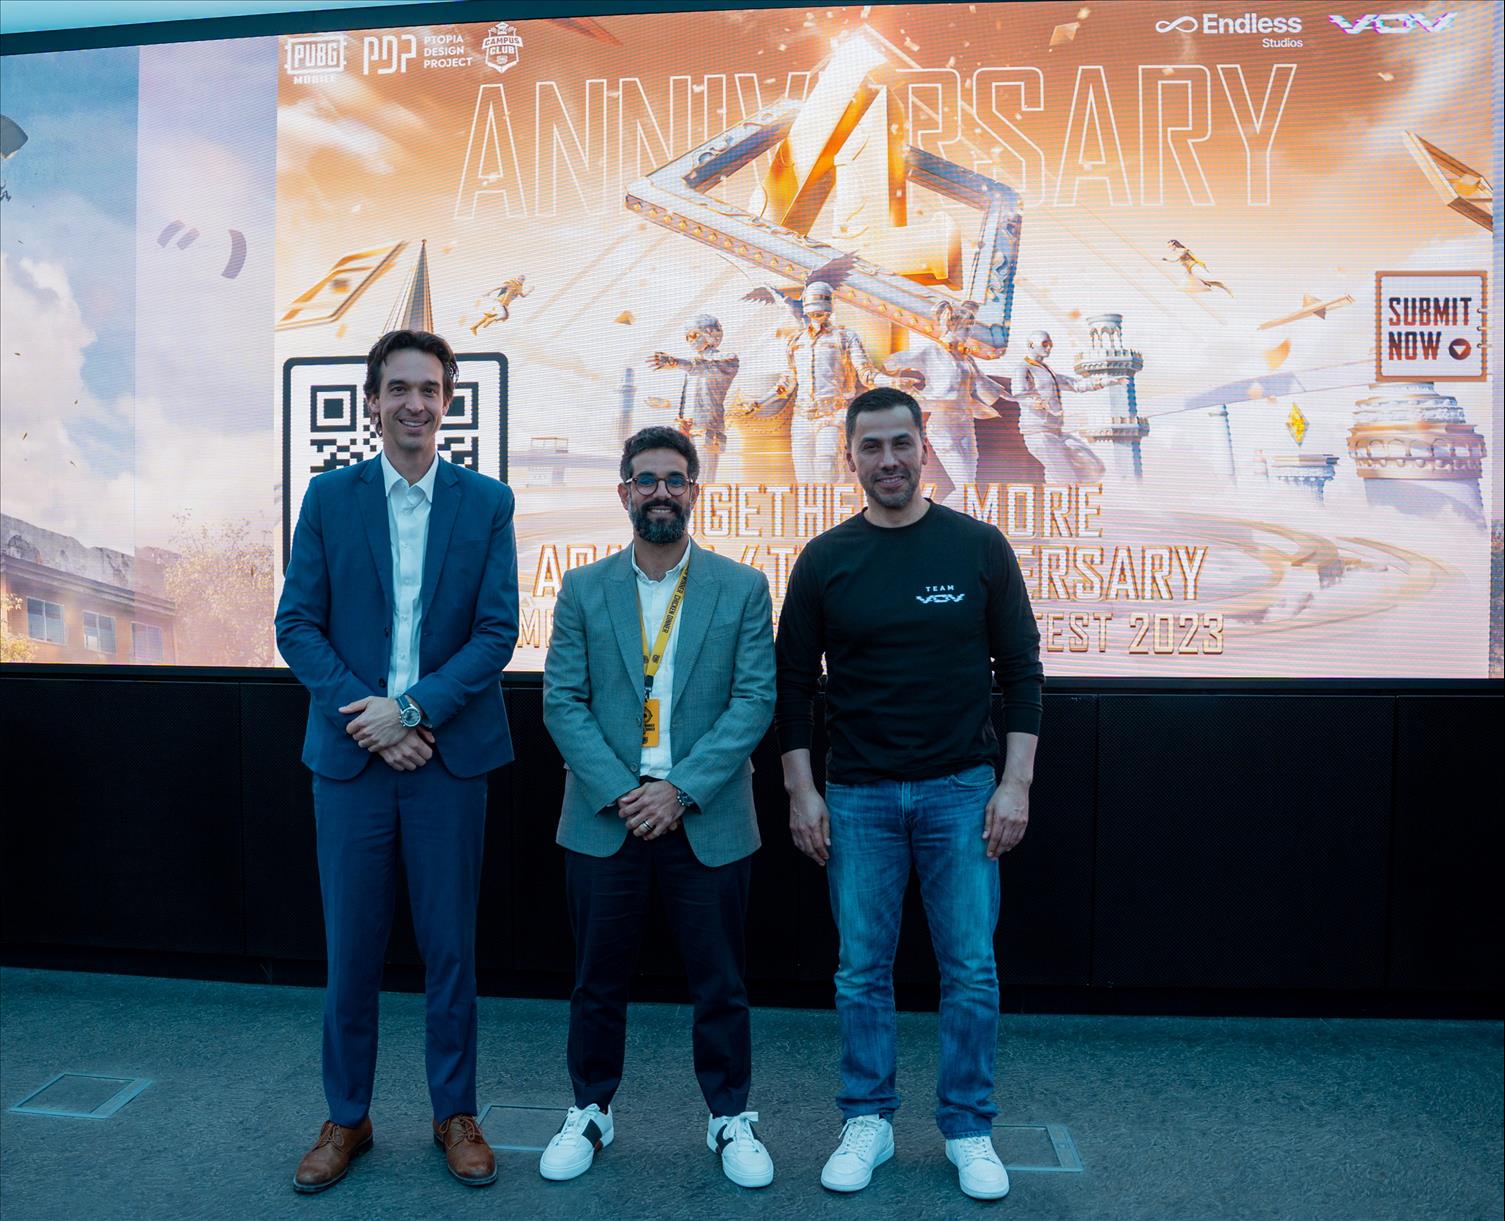 PUBG MOBILE Partners With VOV Gaming And Endless Studios To Launch MENA Campus Design Contest In KSA - Mid-East.Info